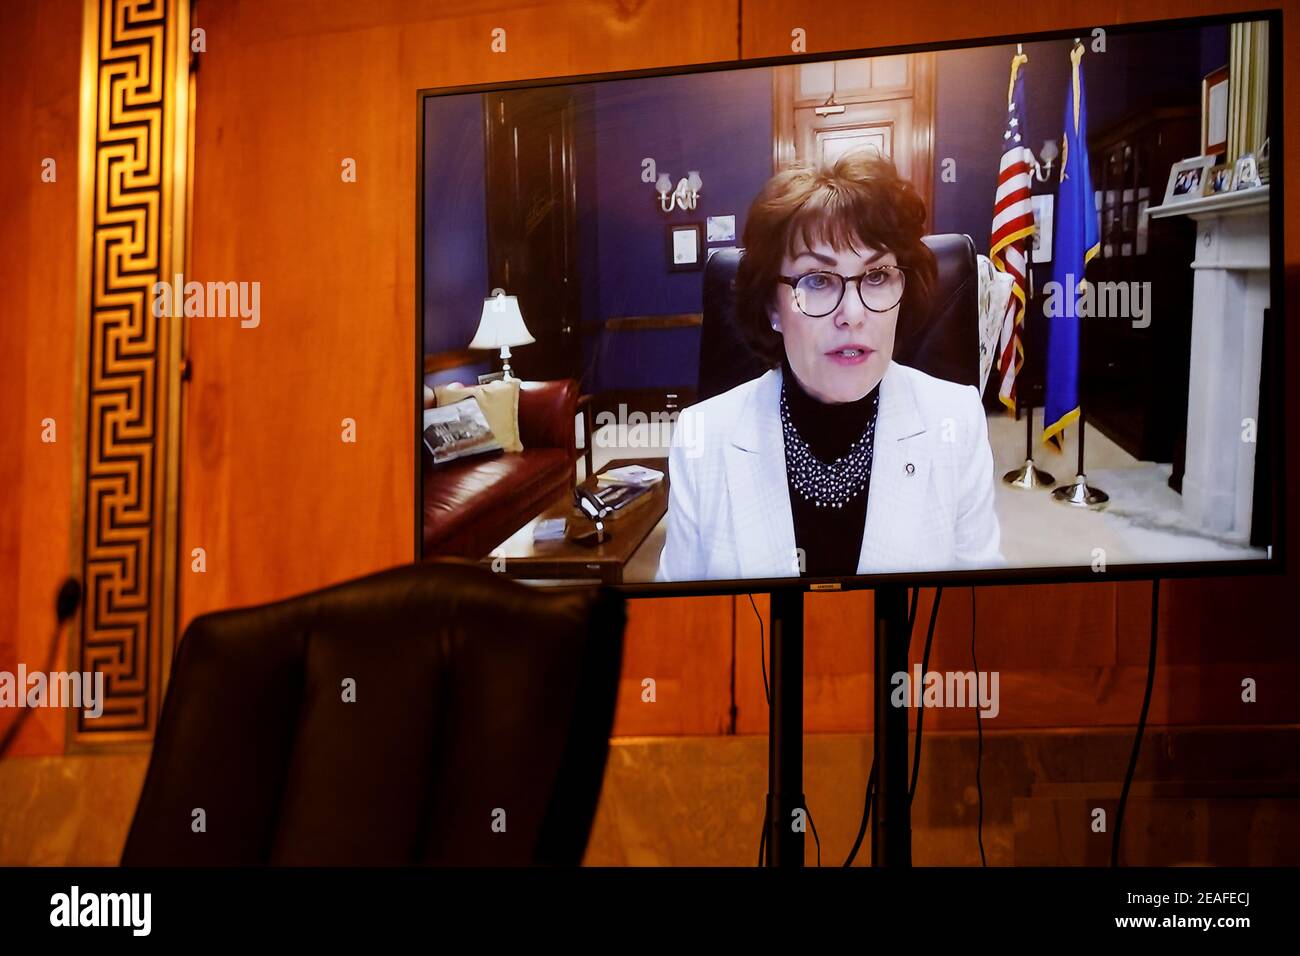 United States Senator Jacky Rosen (Democrat of Nevada), appears remotely during a Senate Homeland Security and Governmental Affairs Committee confirmation hearing for Neera Tanden, director of the Office and Management and Budget (OMB) nominee for U.S. President Joe Biden, in Washington, D.C., U.S., on Tuesday, Feb. 9, 2021. Tanden, who pledged to work with both parties after drawing sharp criticism from Republicans for sniping at them on social media, worked on the Affordable Care Act during the Obama years and was an aide to Hillary Clinton from her time as first lady. Credit: Ting Shen / Po Stock Photo